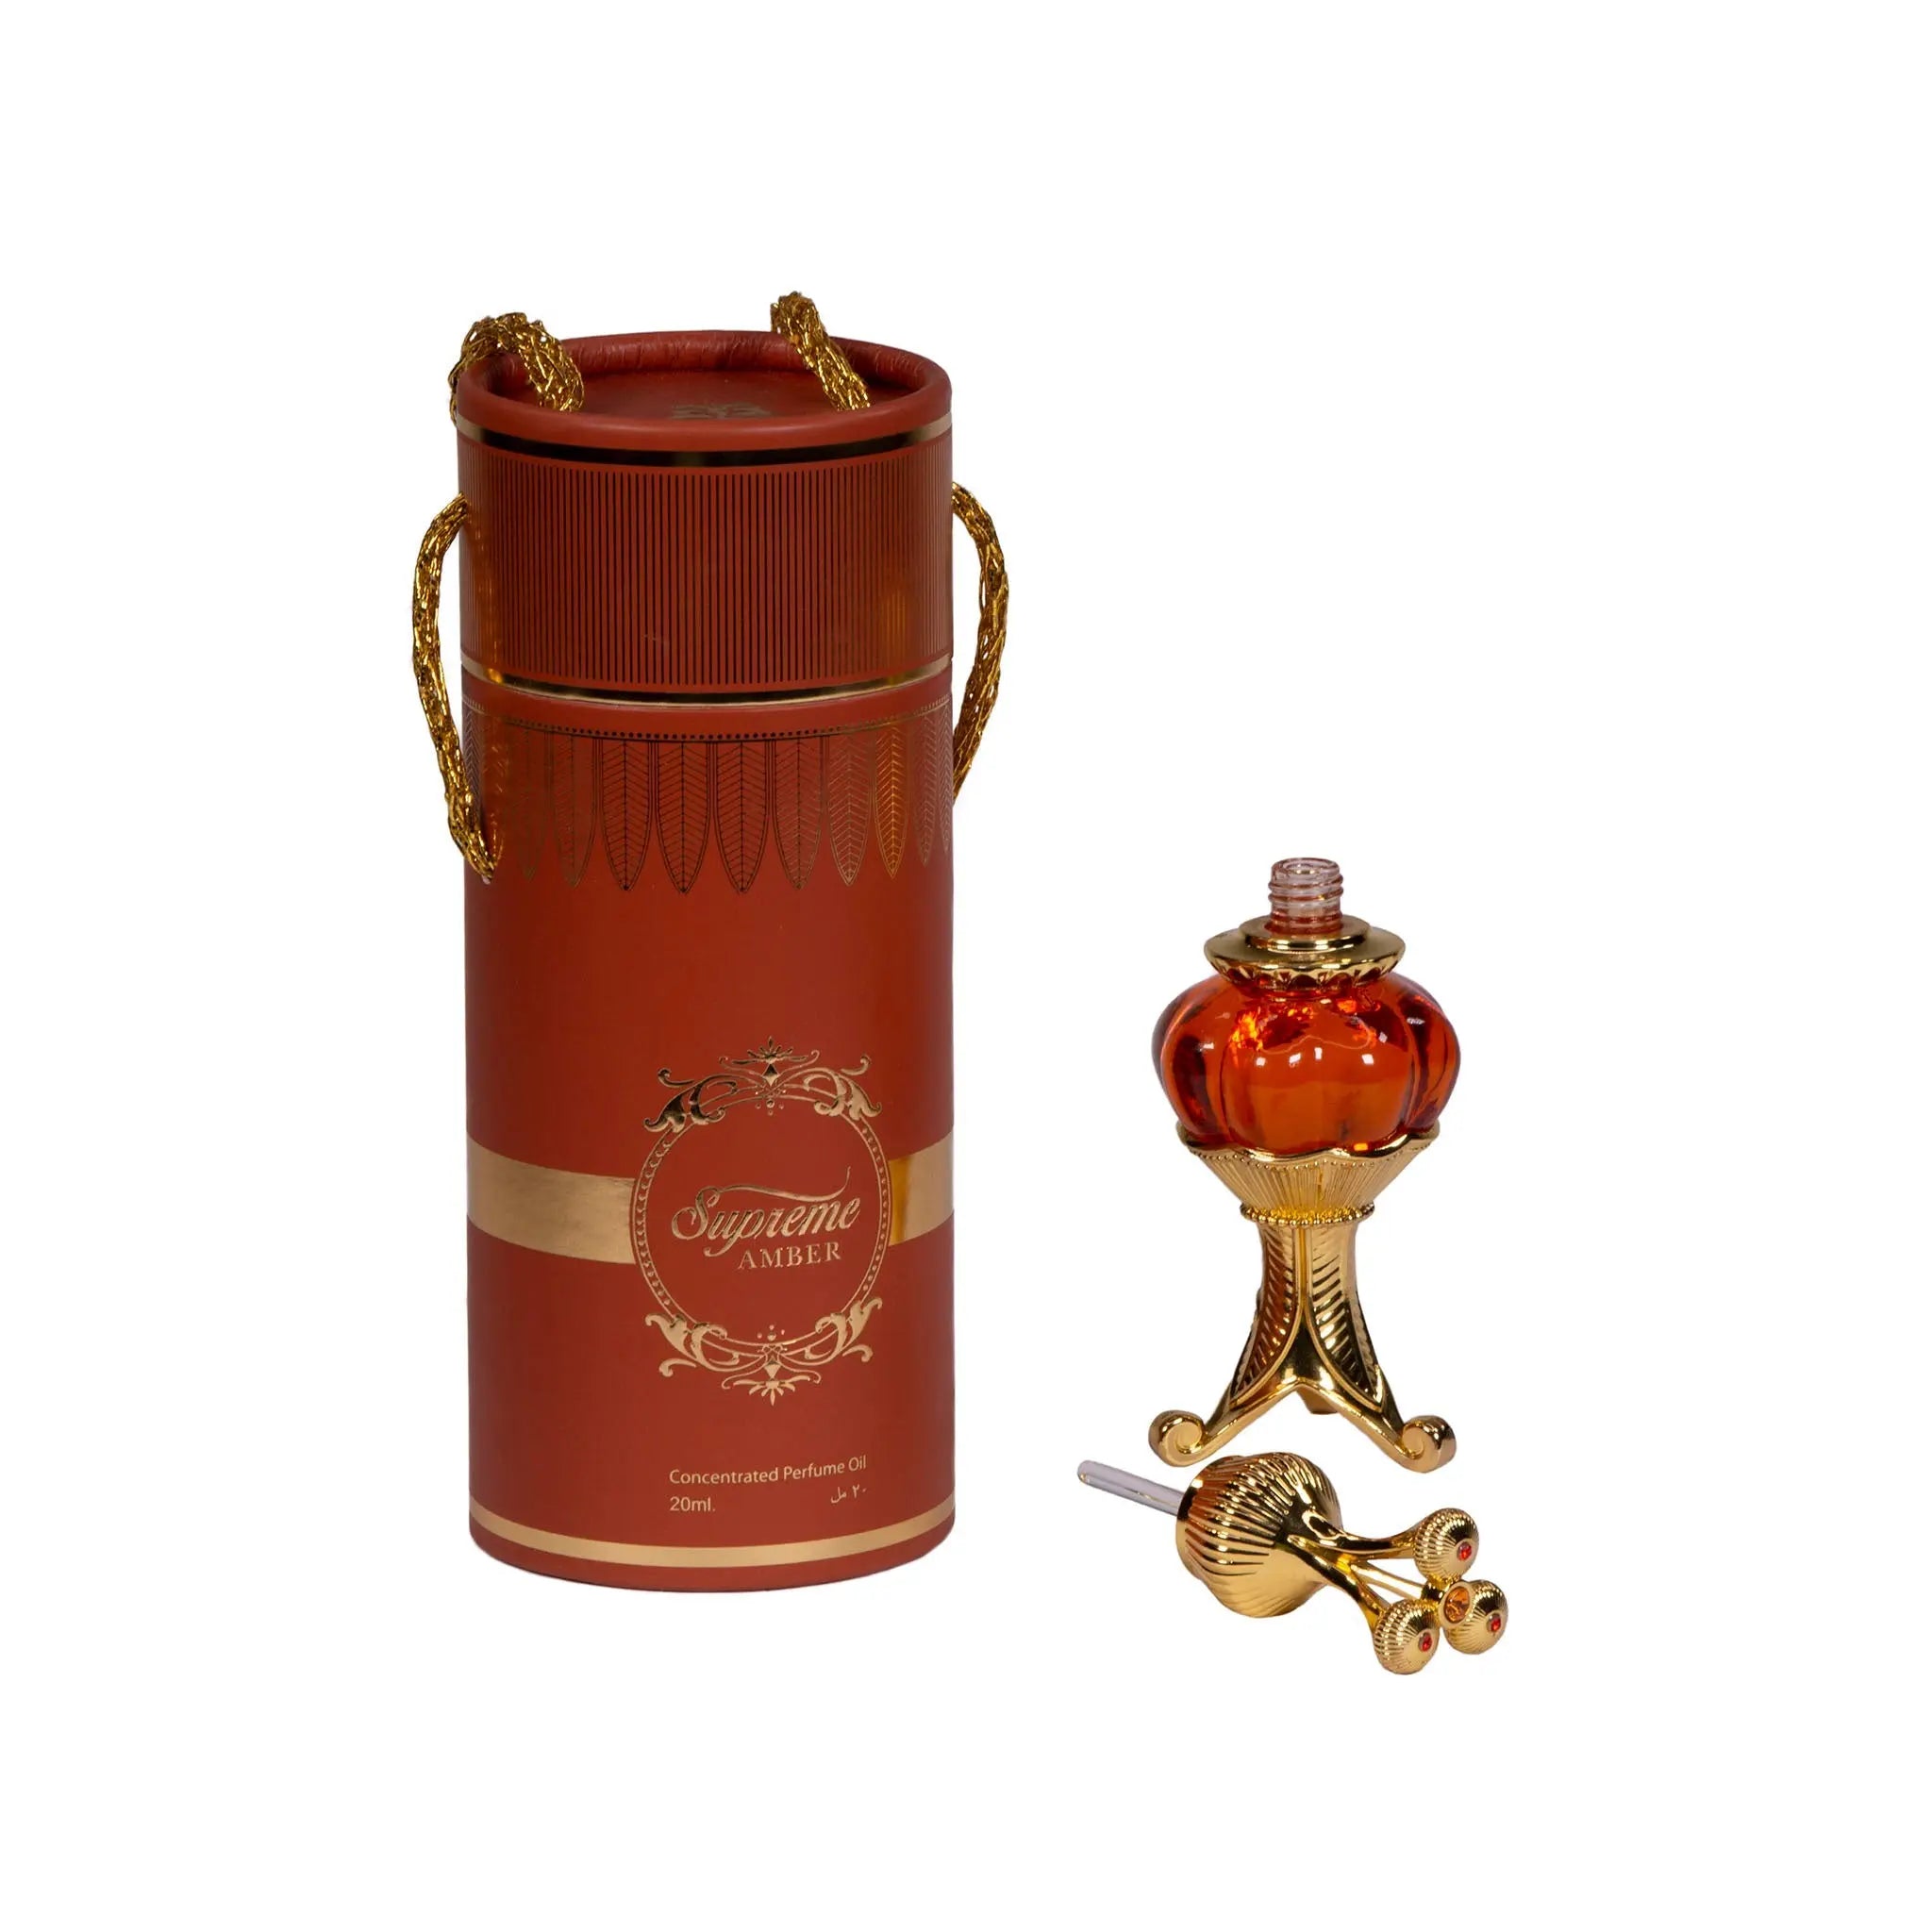 The image depicts a luxurious perfume oil set featuring a red cylindrical container with gold accents and a red and gold perfume oil bottle resting on an ornate golden stand. The container, adorned with a golden motif and the words "Supreme AMBER Concentrated Perfume Oil 20ml", has a lid with elegant gold rope handles. Beside it, the spherical bottle has a rich, amber color with a gold-detailed cap, and its gold applicator rod is placed in front of the stand. 